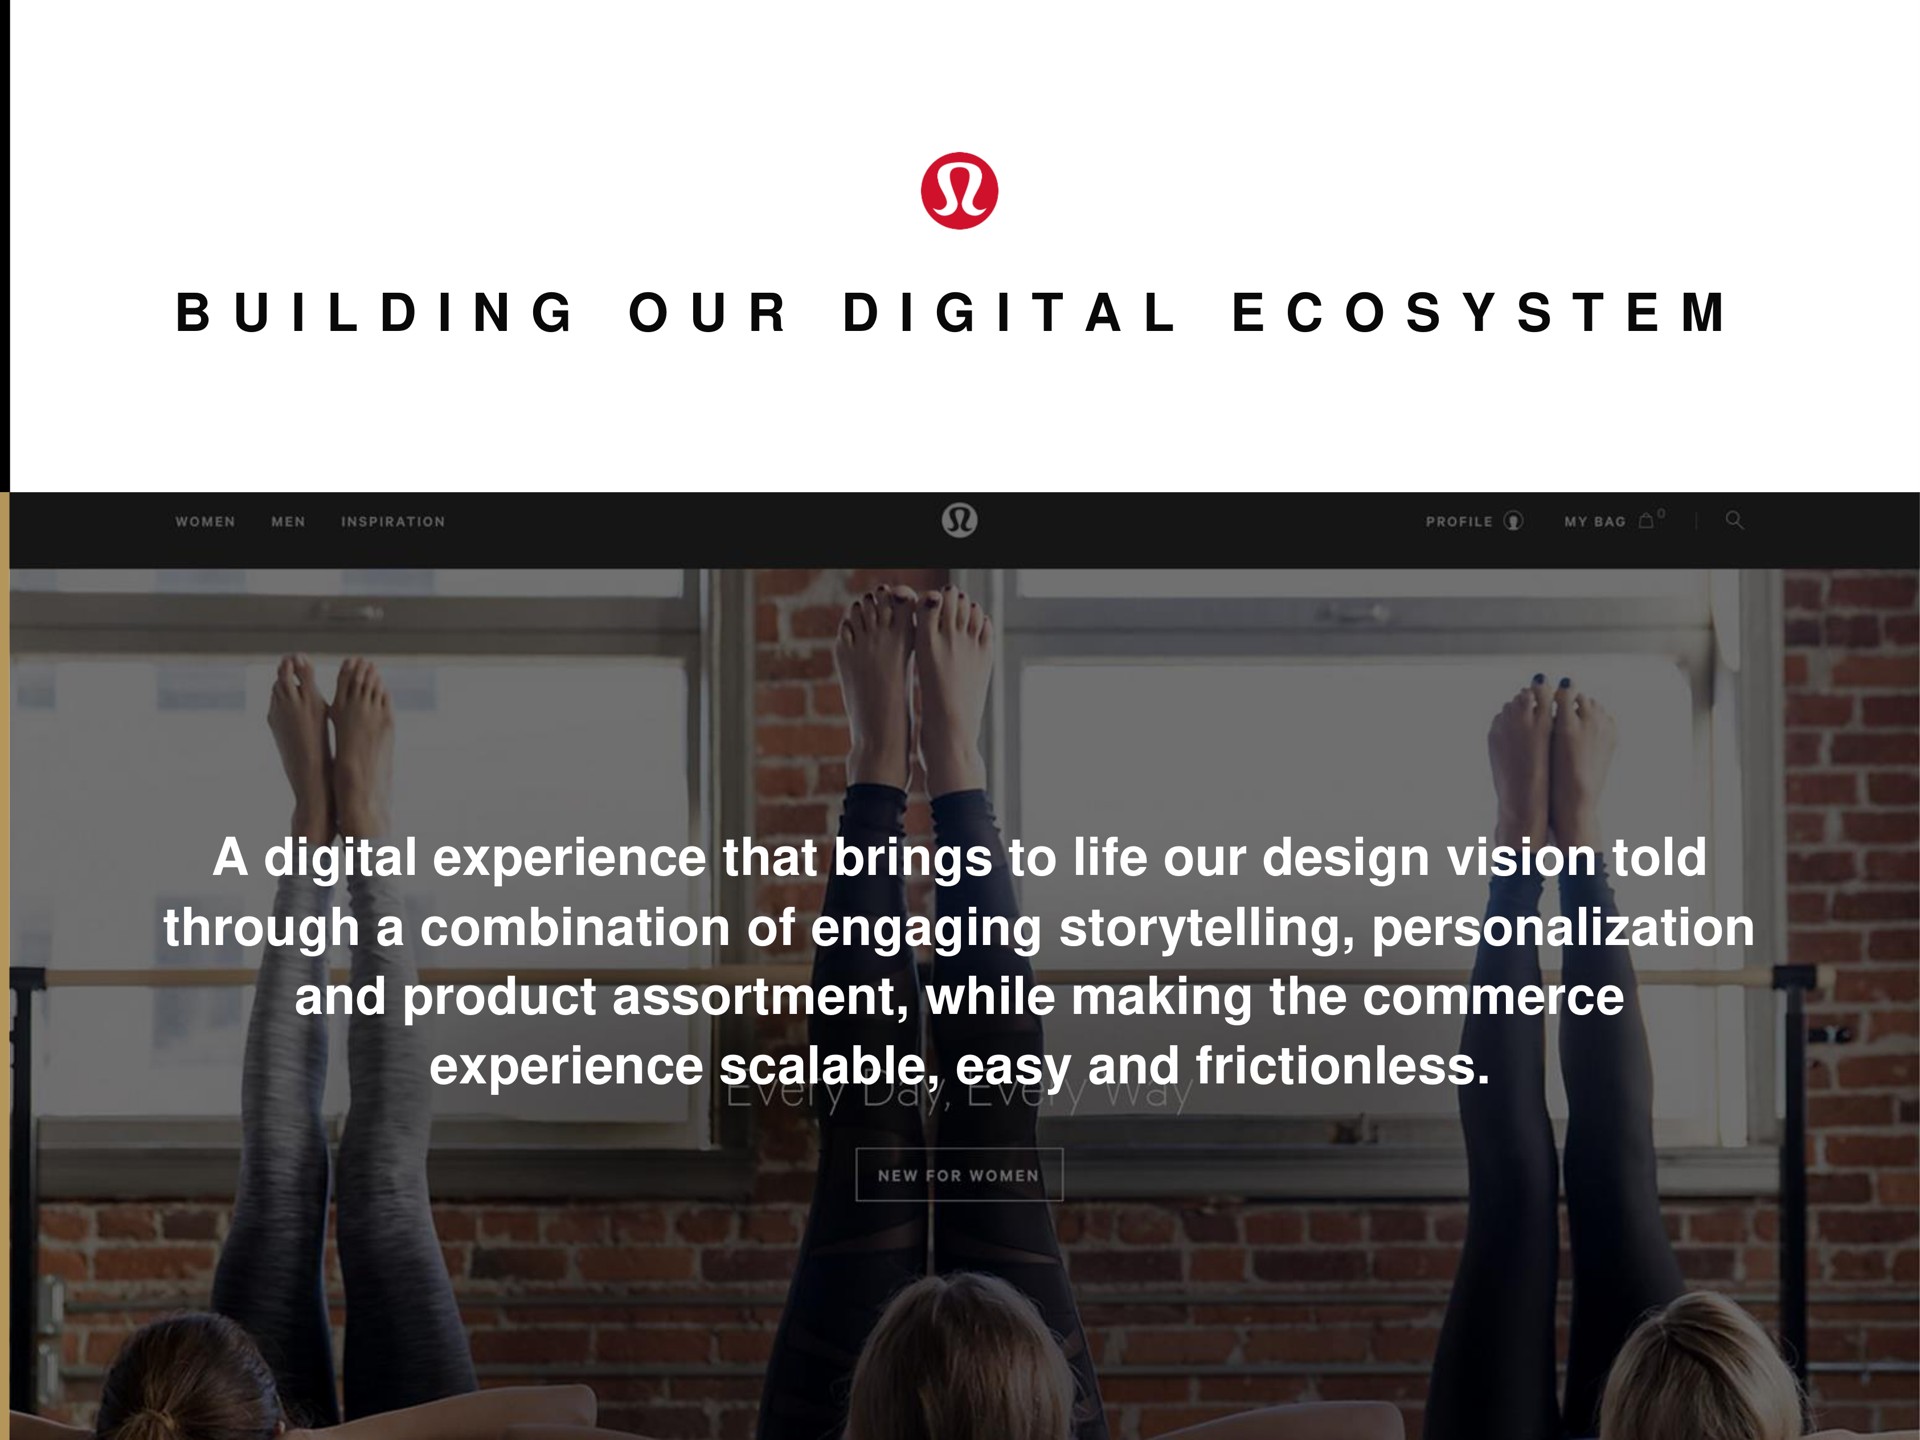 i i i i a a digital experience that brings to life our design vision told through a combination of engaging storytelling personalization and product assortment while making the commerce experience scalable easy and frictionless | Lululemon